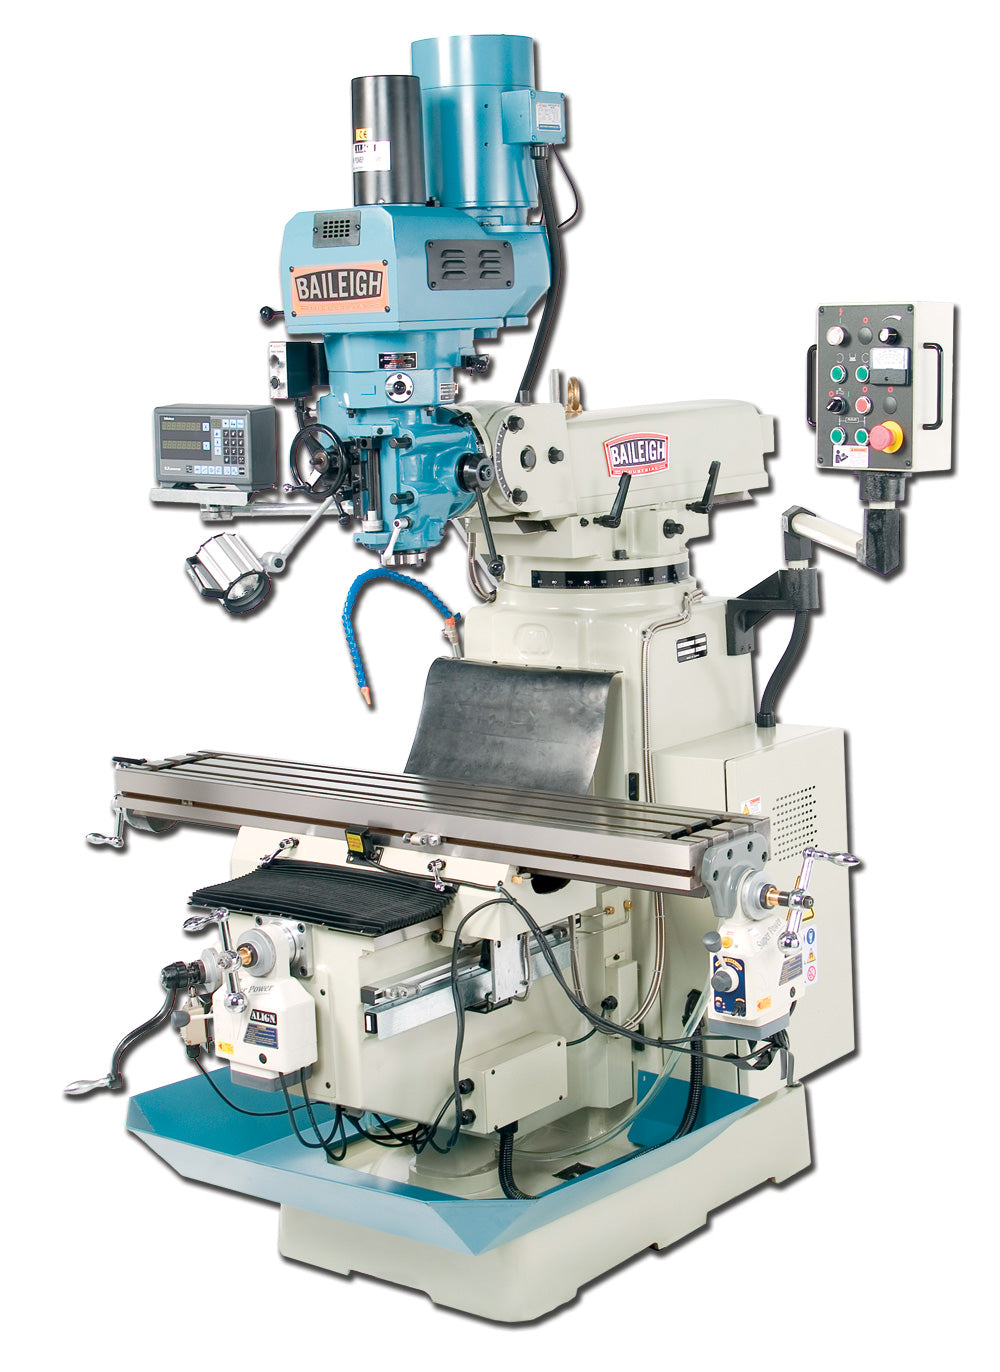 Baileigh VM-1054-3 220V 3 Phase Variable Speed Vertical Milling Machine with Rigid Head 10" x 54" Table